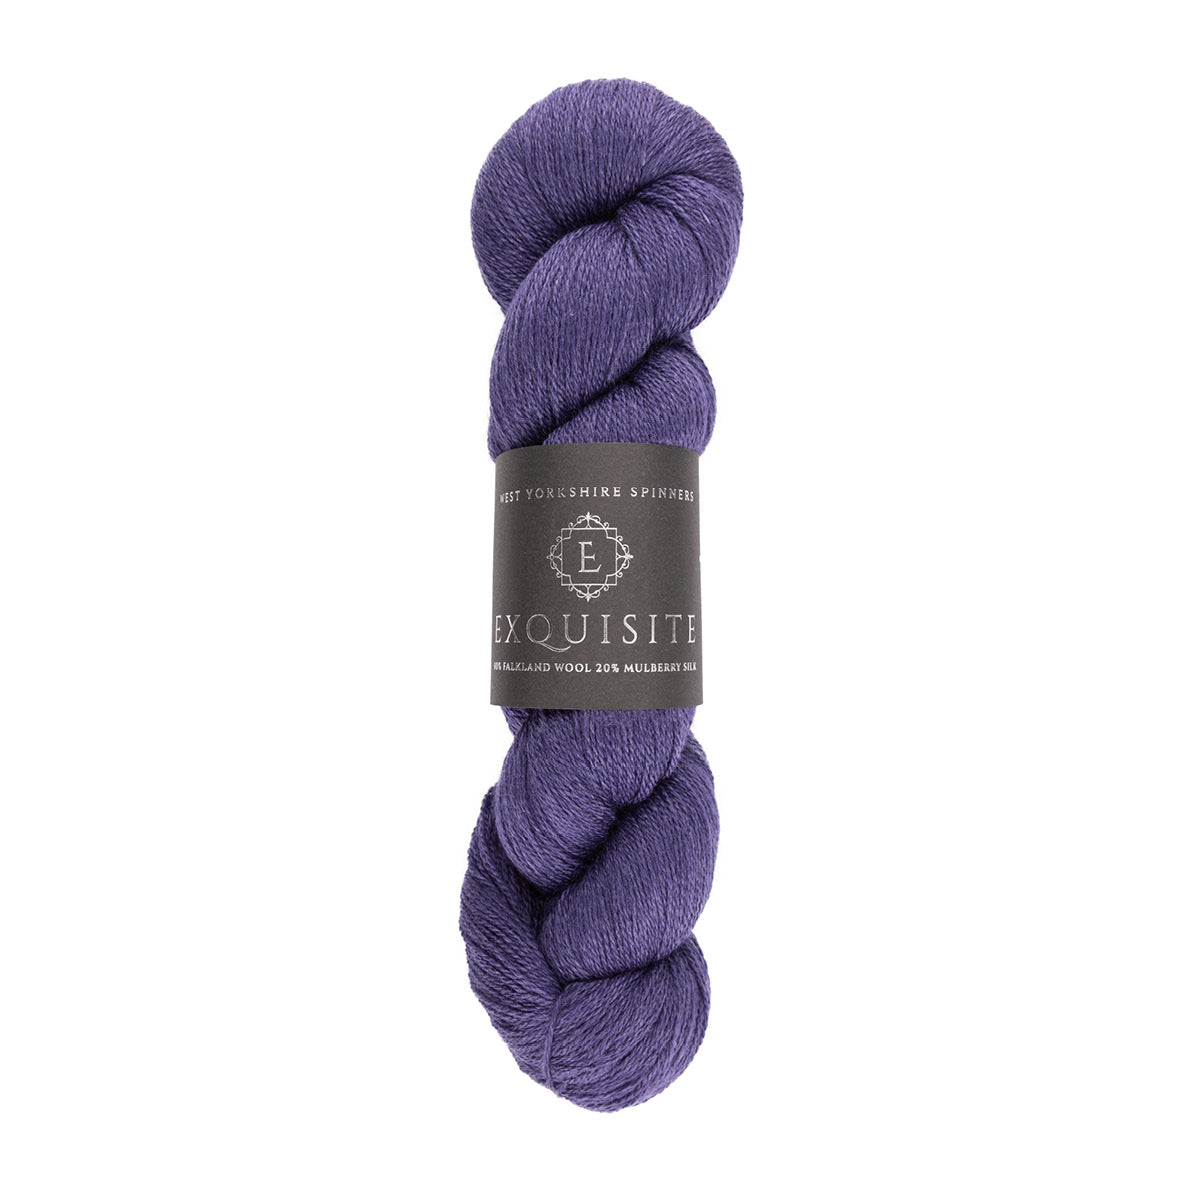 WYS West Yorkshire Spinners Exquisite Lace hank or skein in dark purple shade mayfair 741